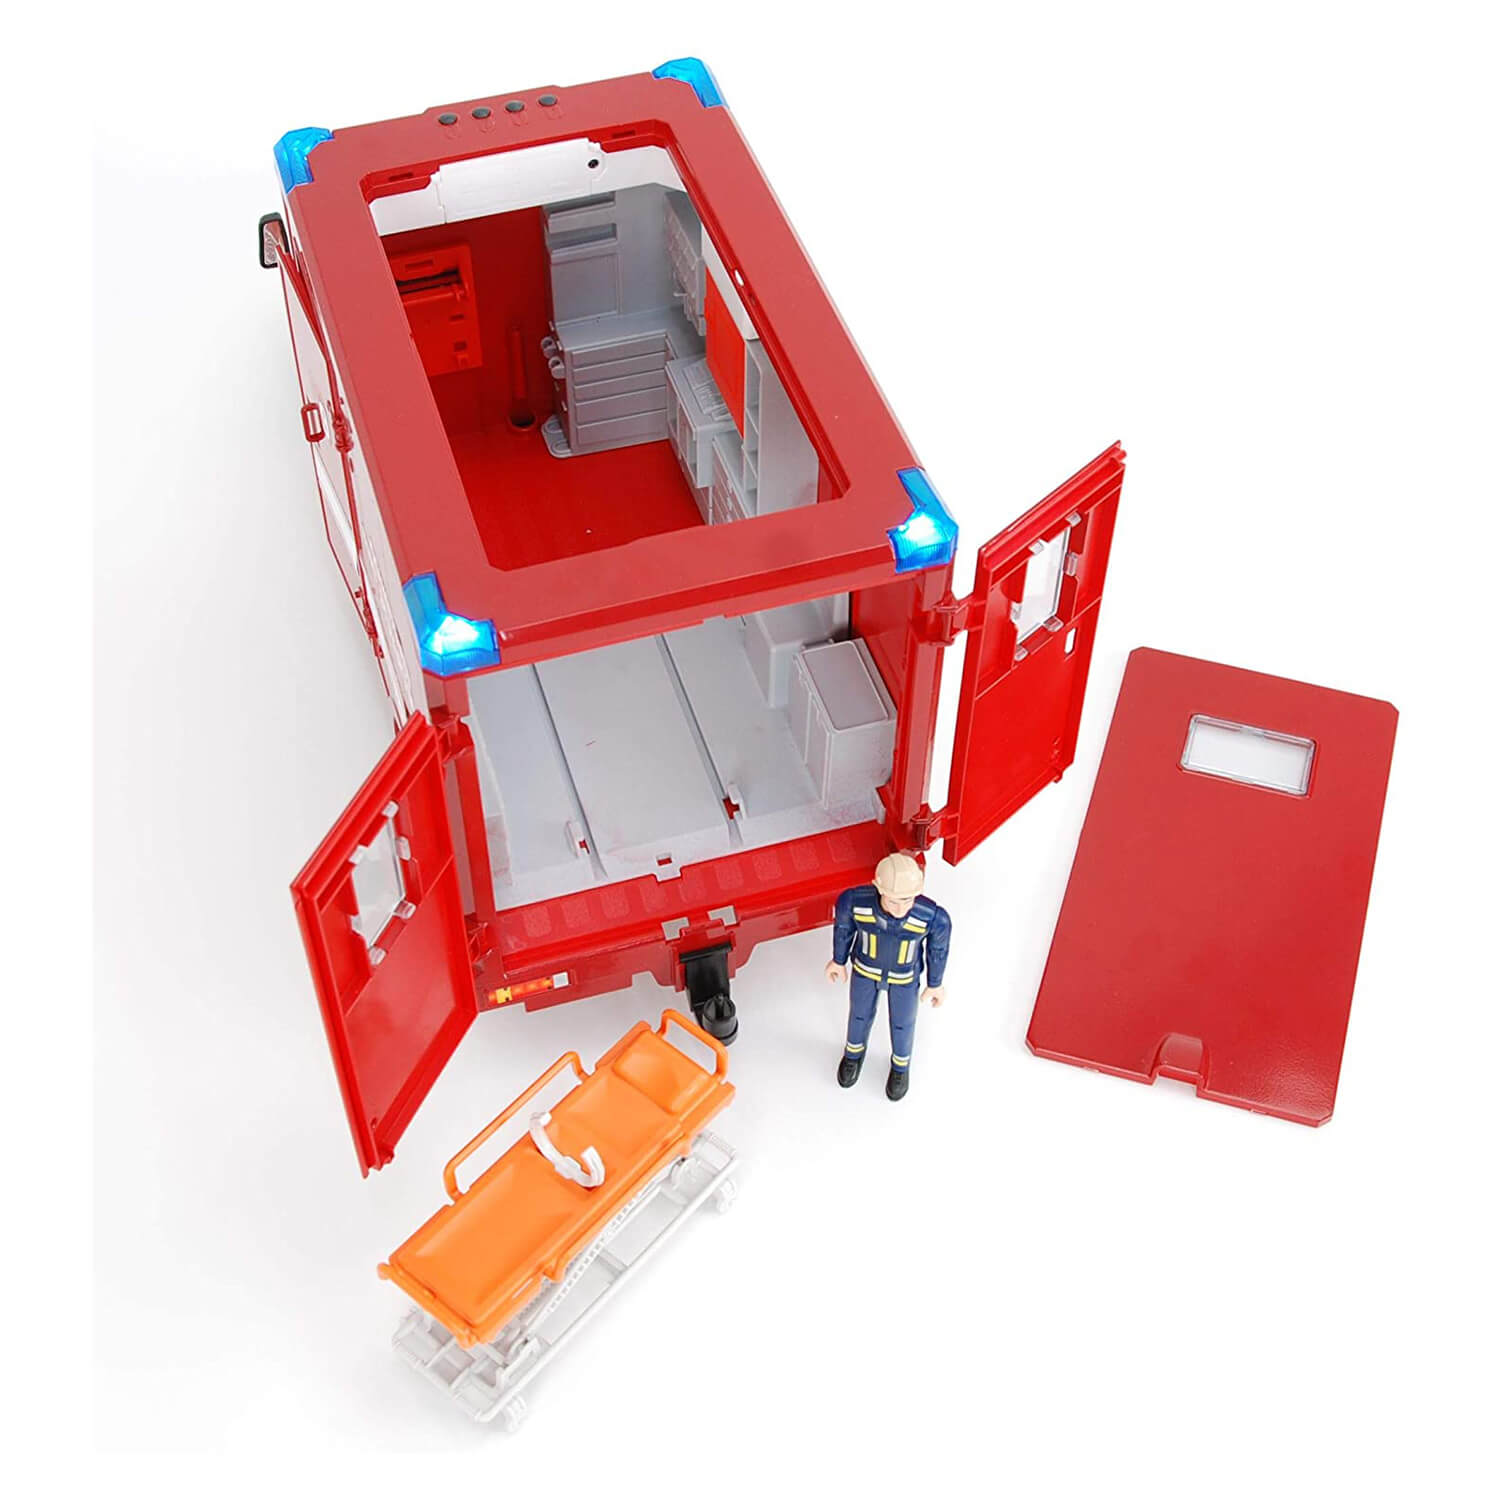 Top view of the emergency vehicle toy.